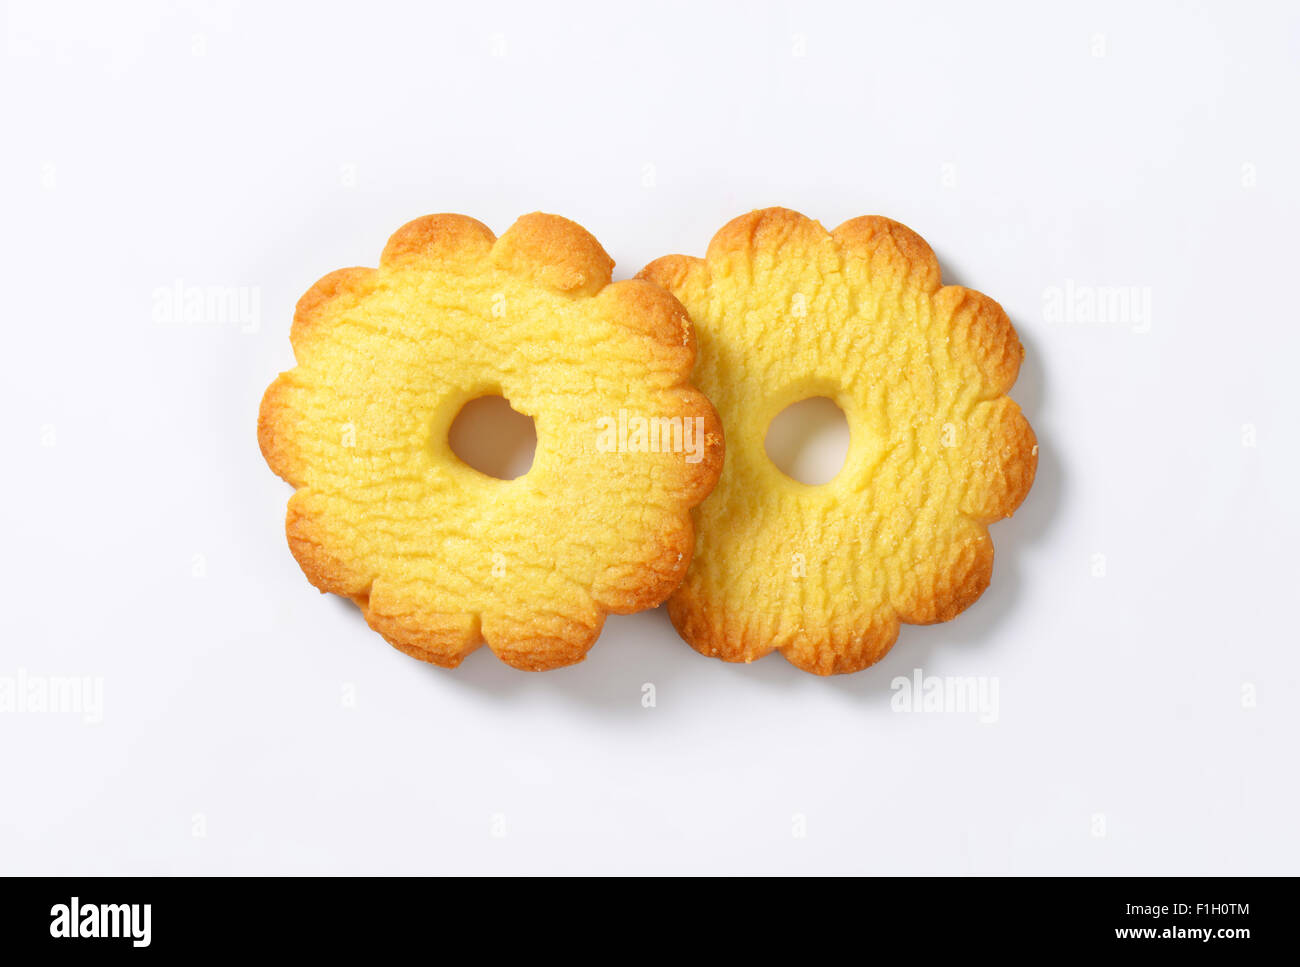 two italian butter cookies Canestrelli on white background Stock Photo